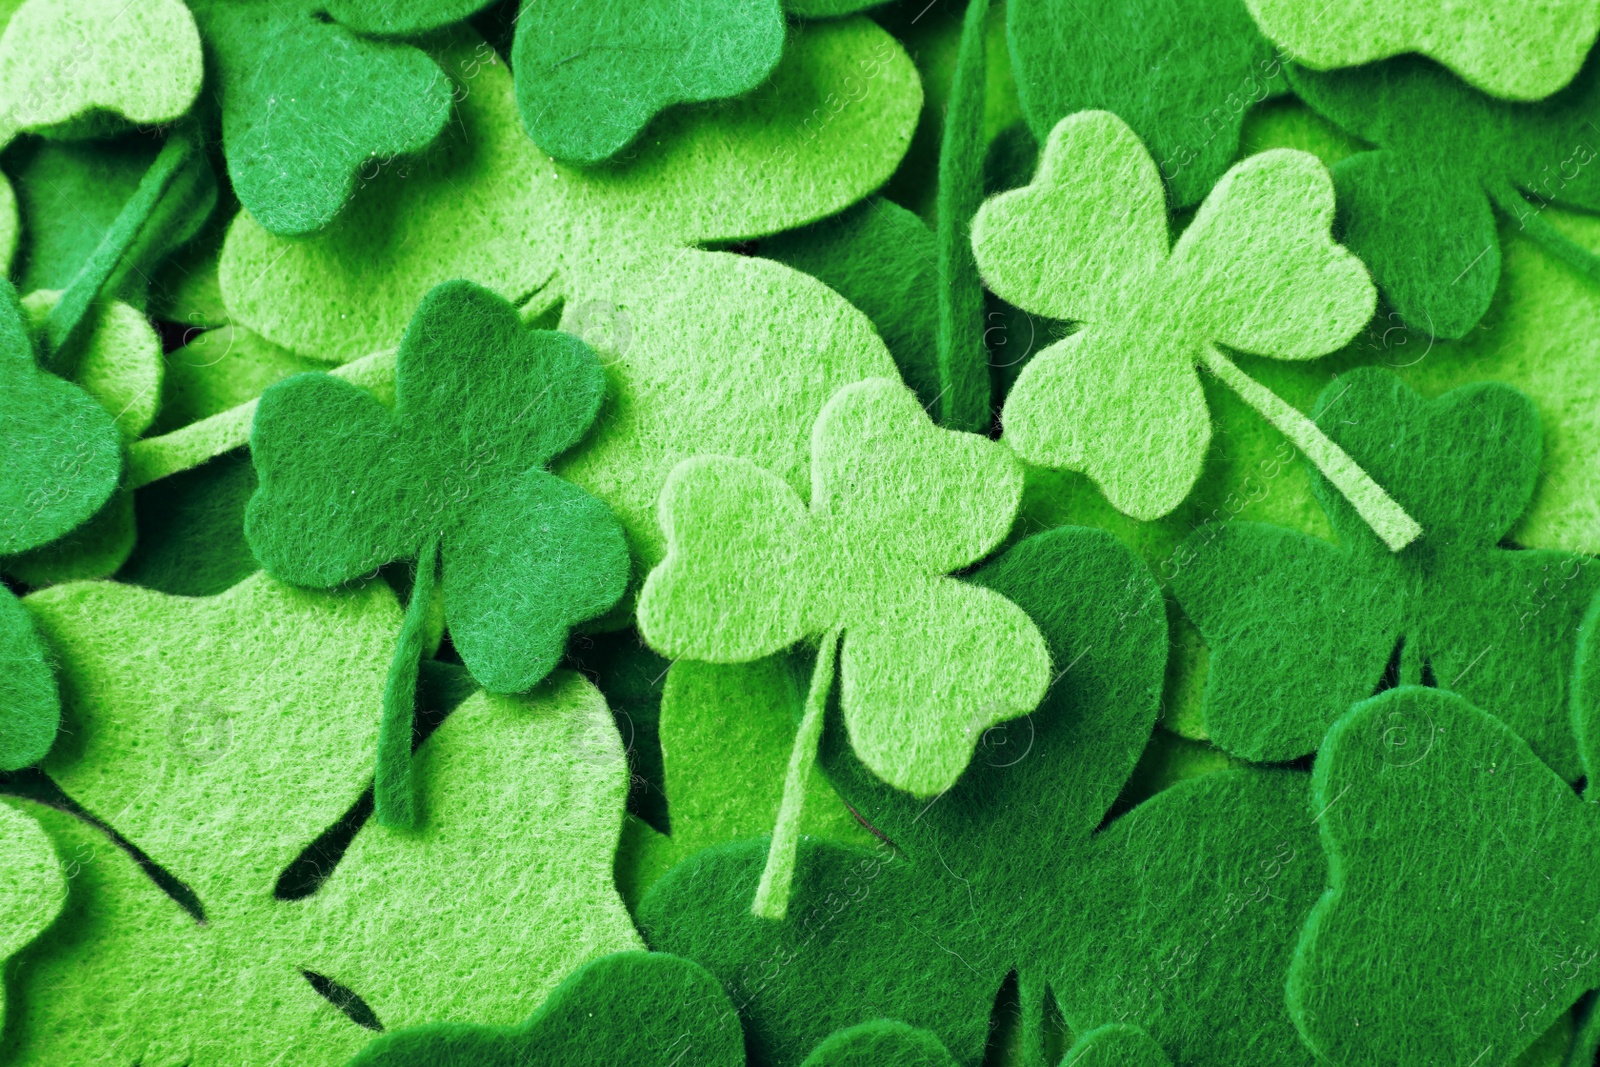 Photo of Green clover leaves as background, top view. St. Patrick's Day celebration